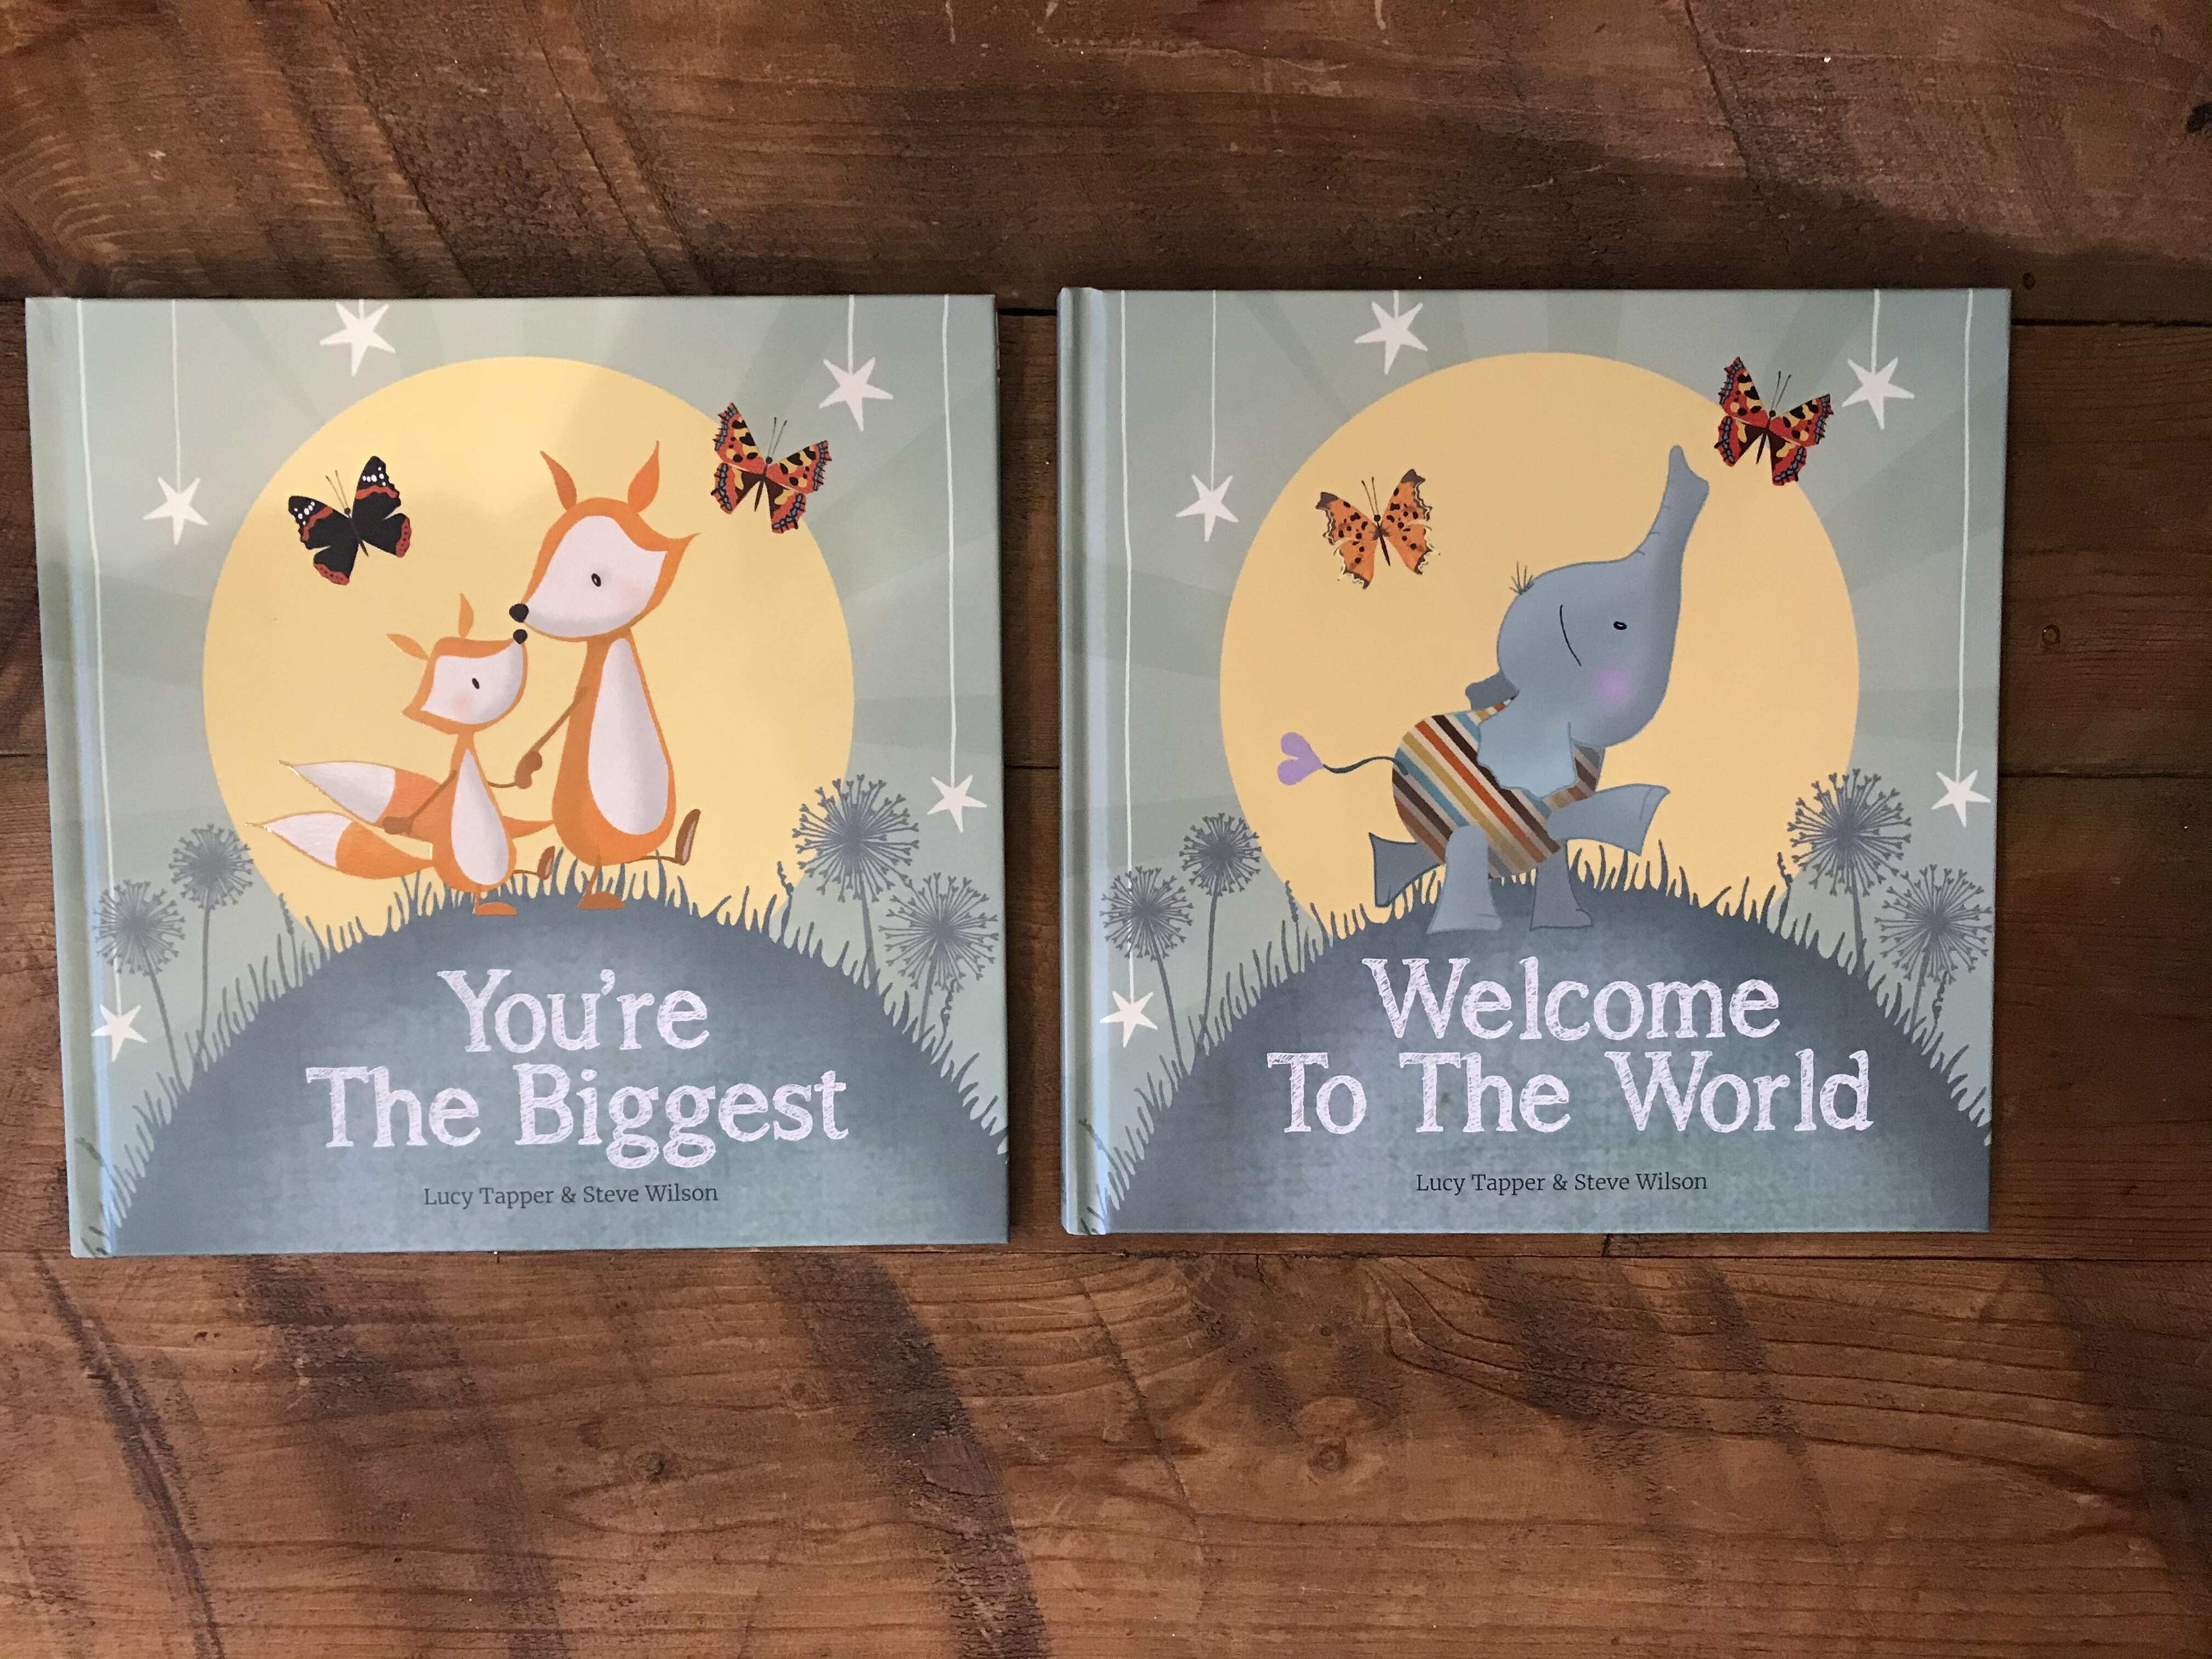 Baby Arrival Books